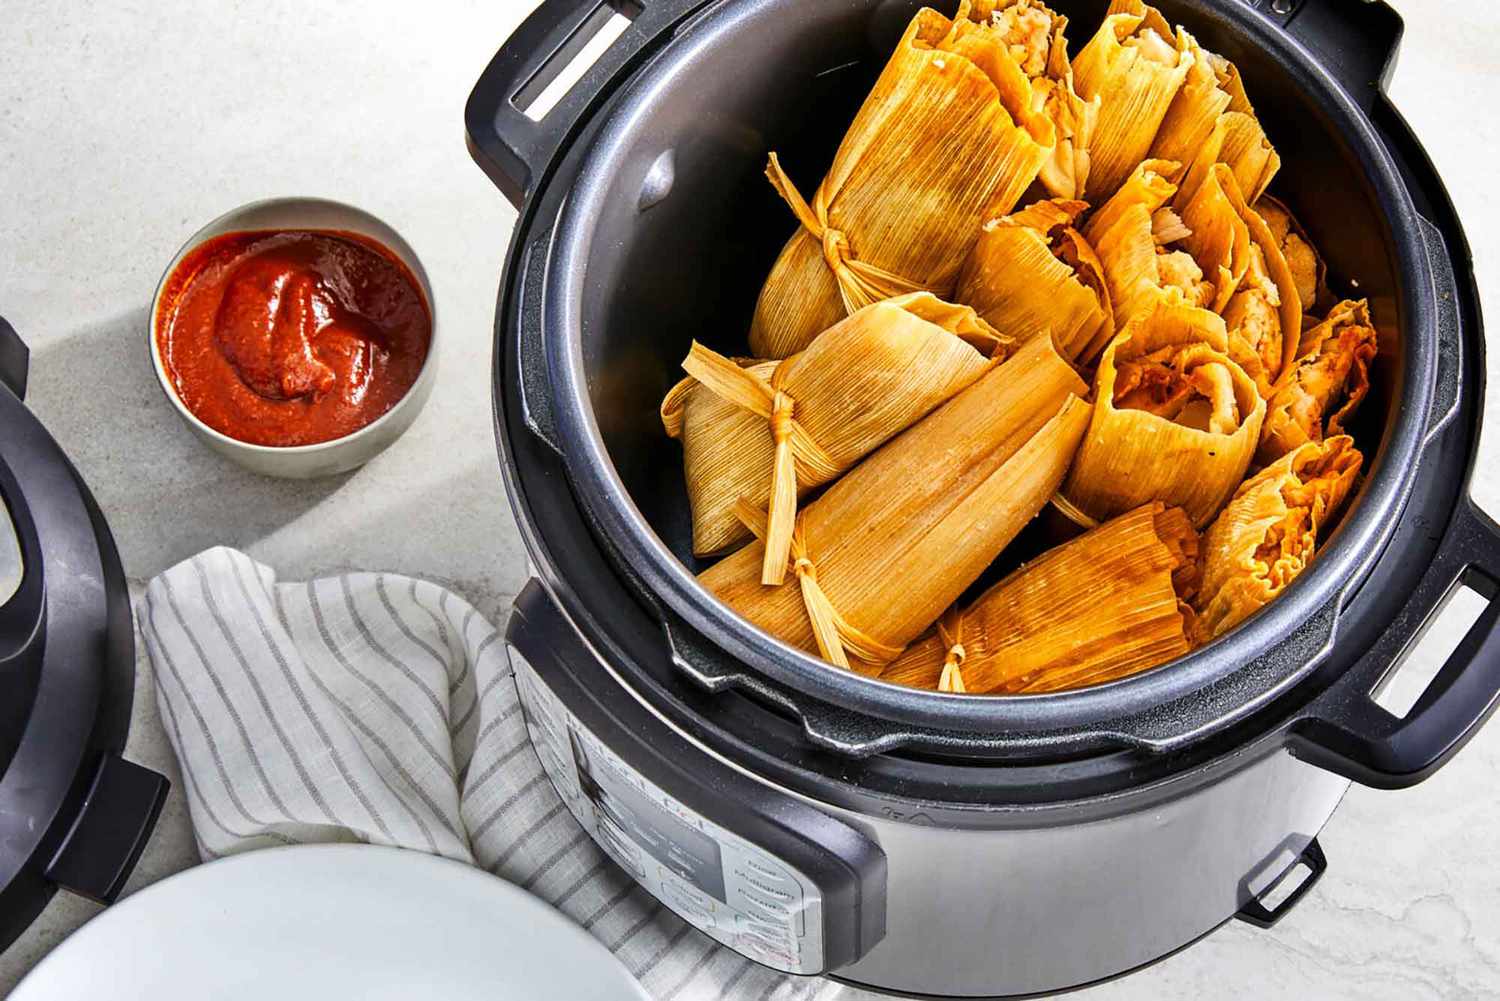 https://storables.com/wp-content/uploads/2023/07/how-long-do-you-cook-tamales-in-a-electric-pressure-cooker-1690758793.jpg